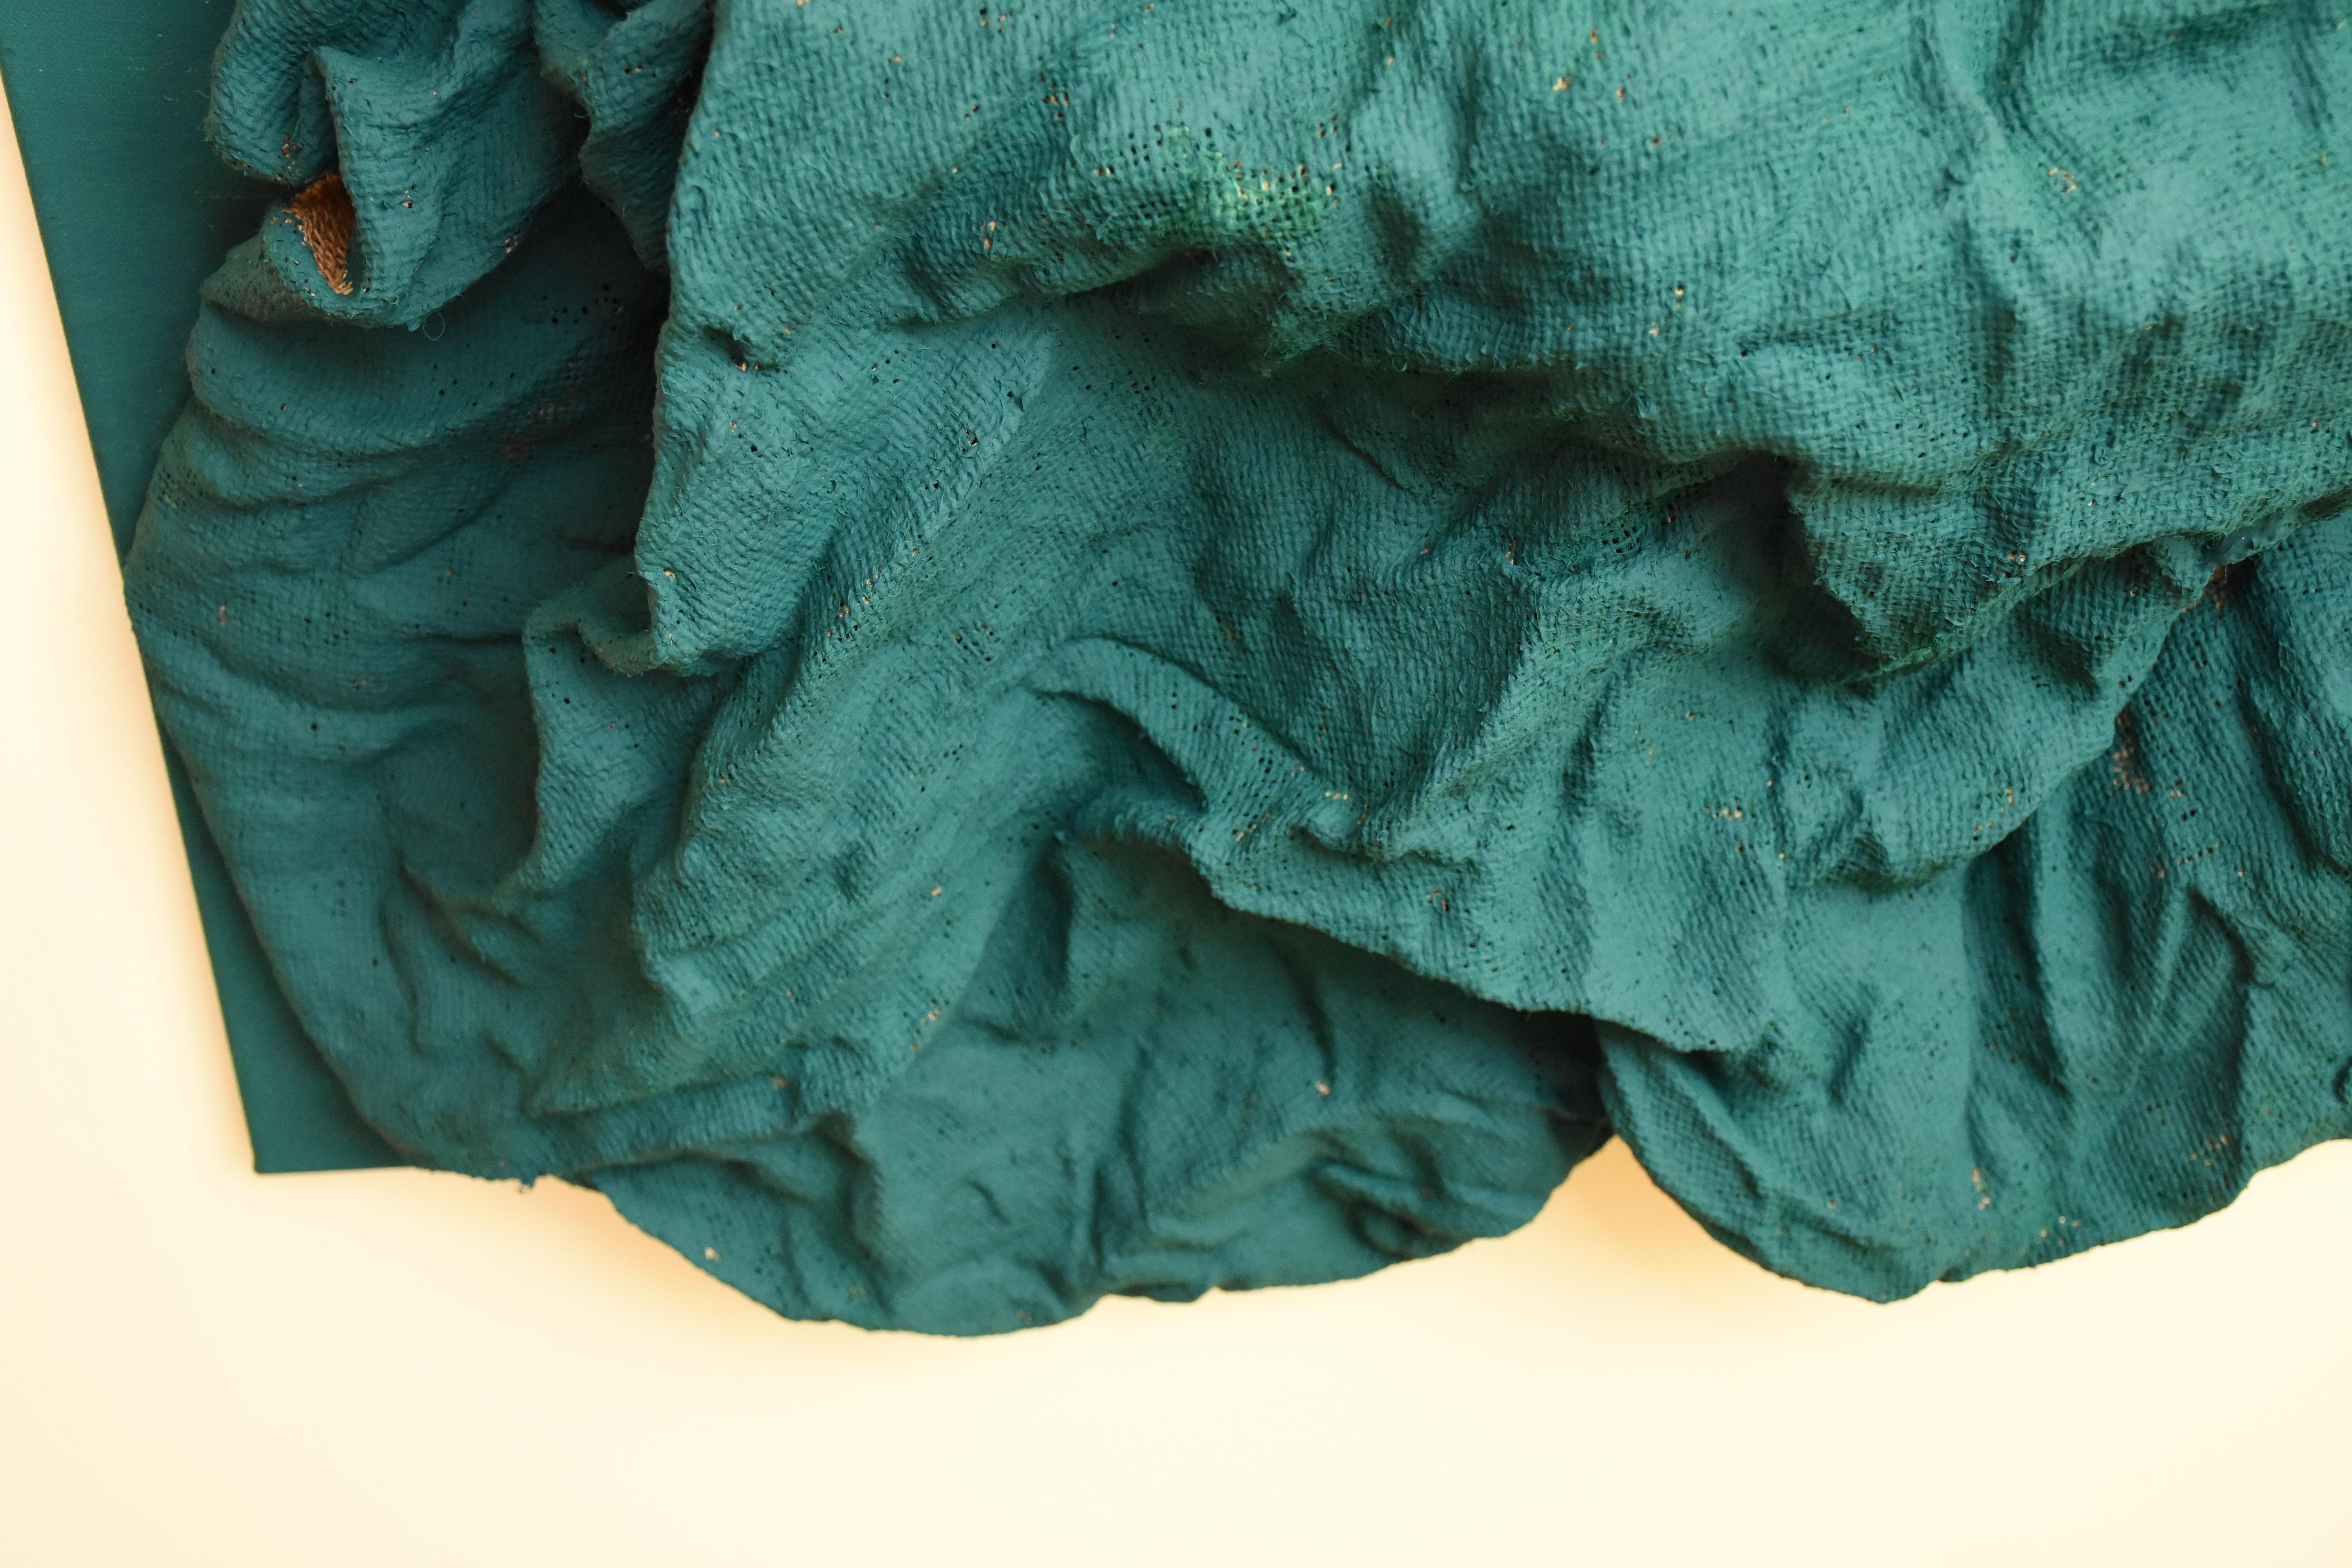 “Emerald Green Folds” is a deep green colored wall sculpture made
with fabric on linen. The elegant folds are steadily built up and add
intricacy to the structure. This creates a dynamic artwork where light
circulates on the surface and shadows are